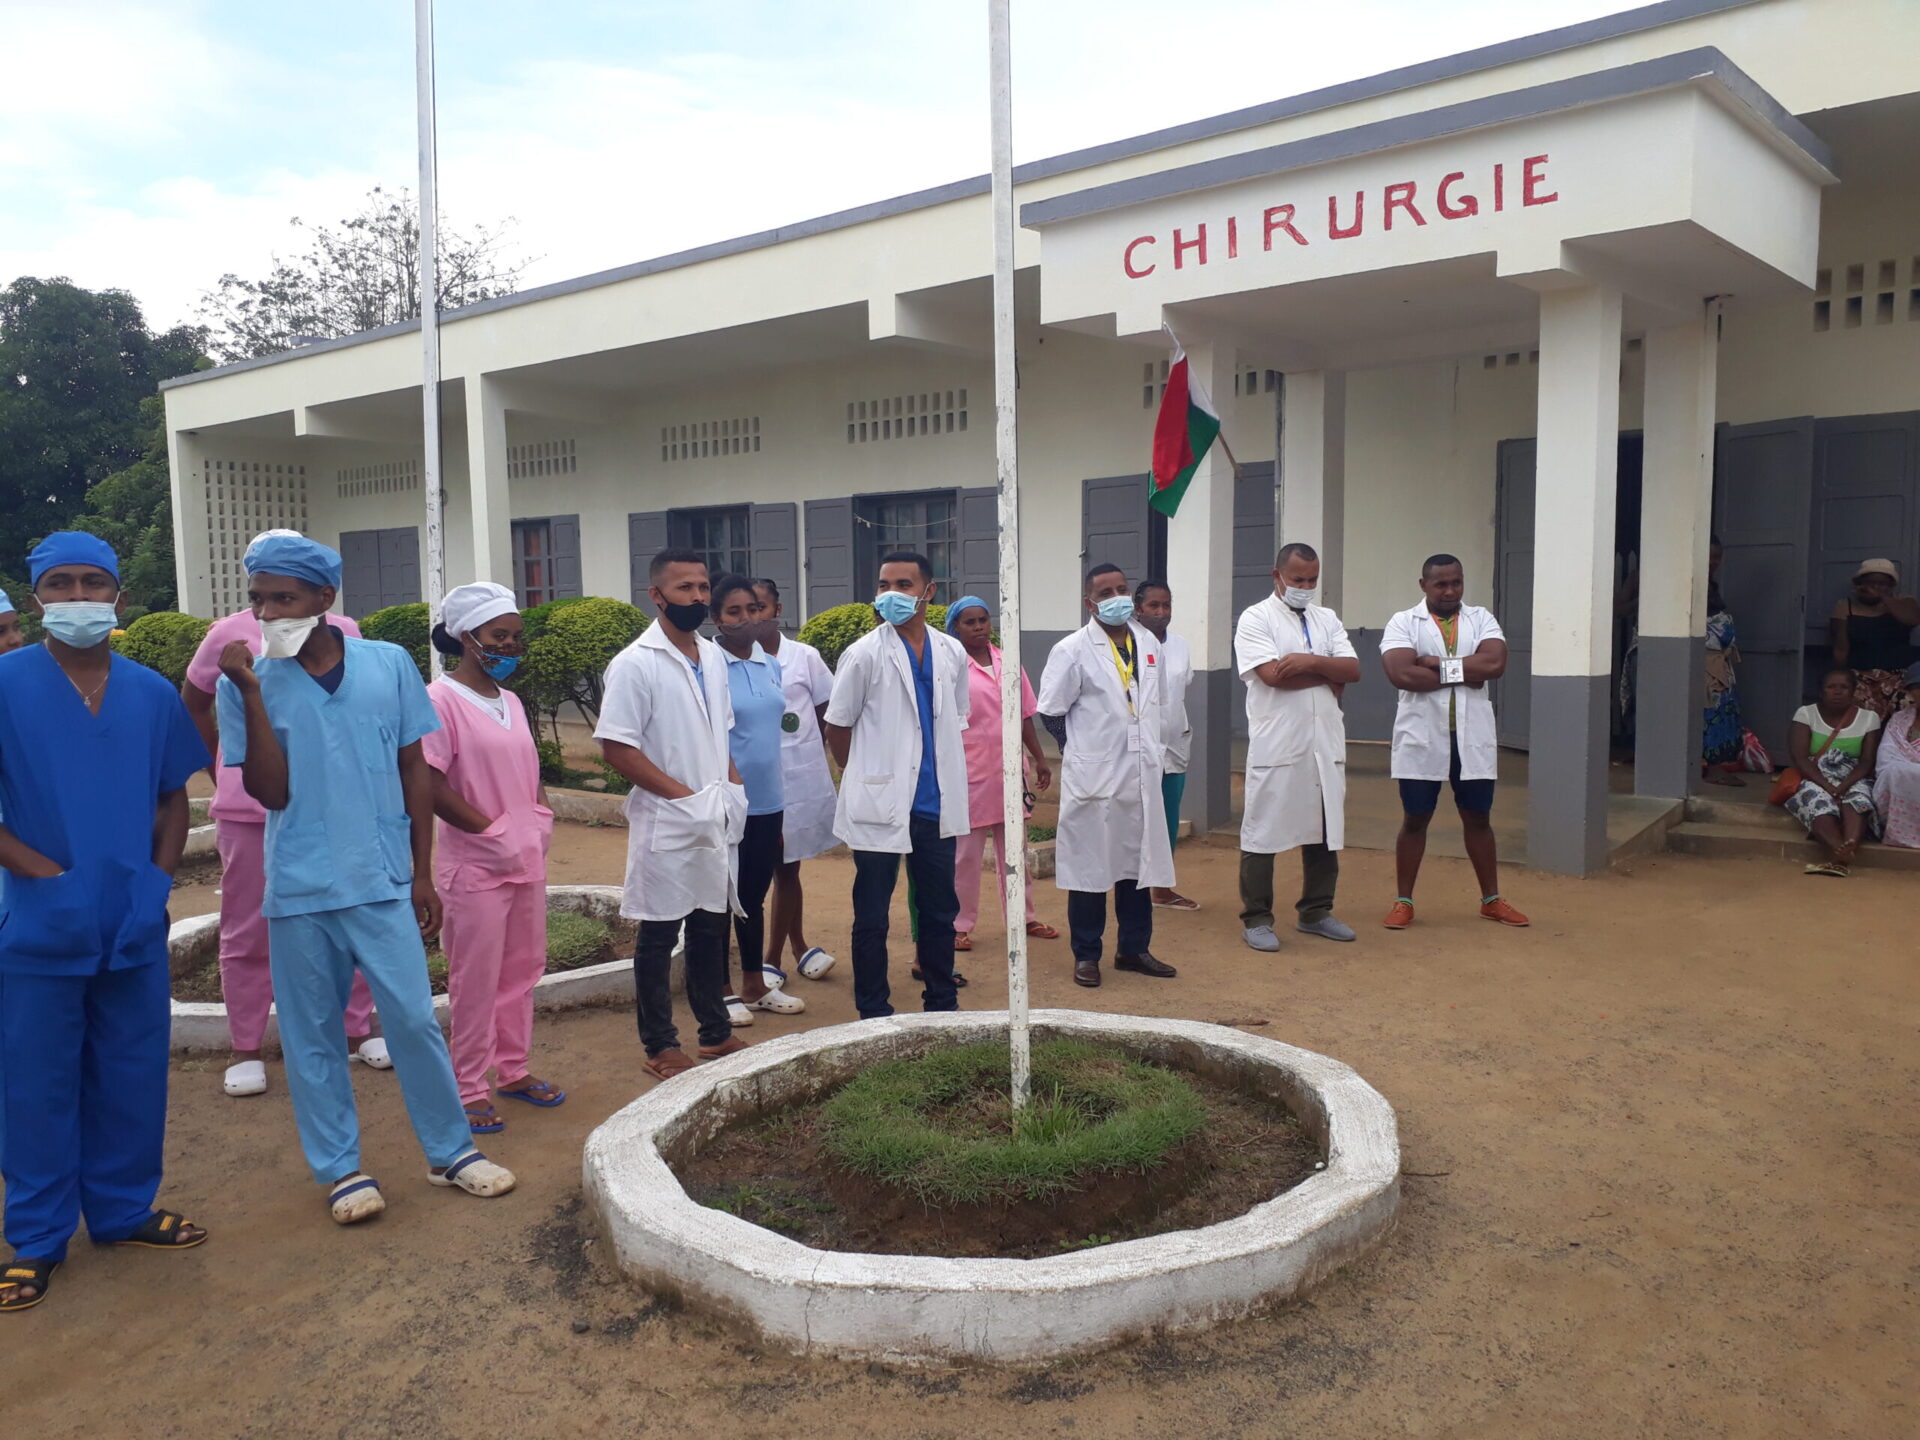 Images of Malagasy doctors and nurses wearing masks